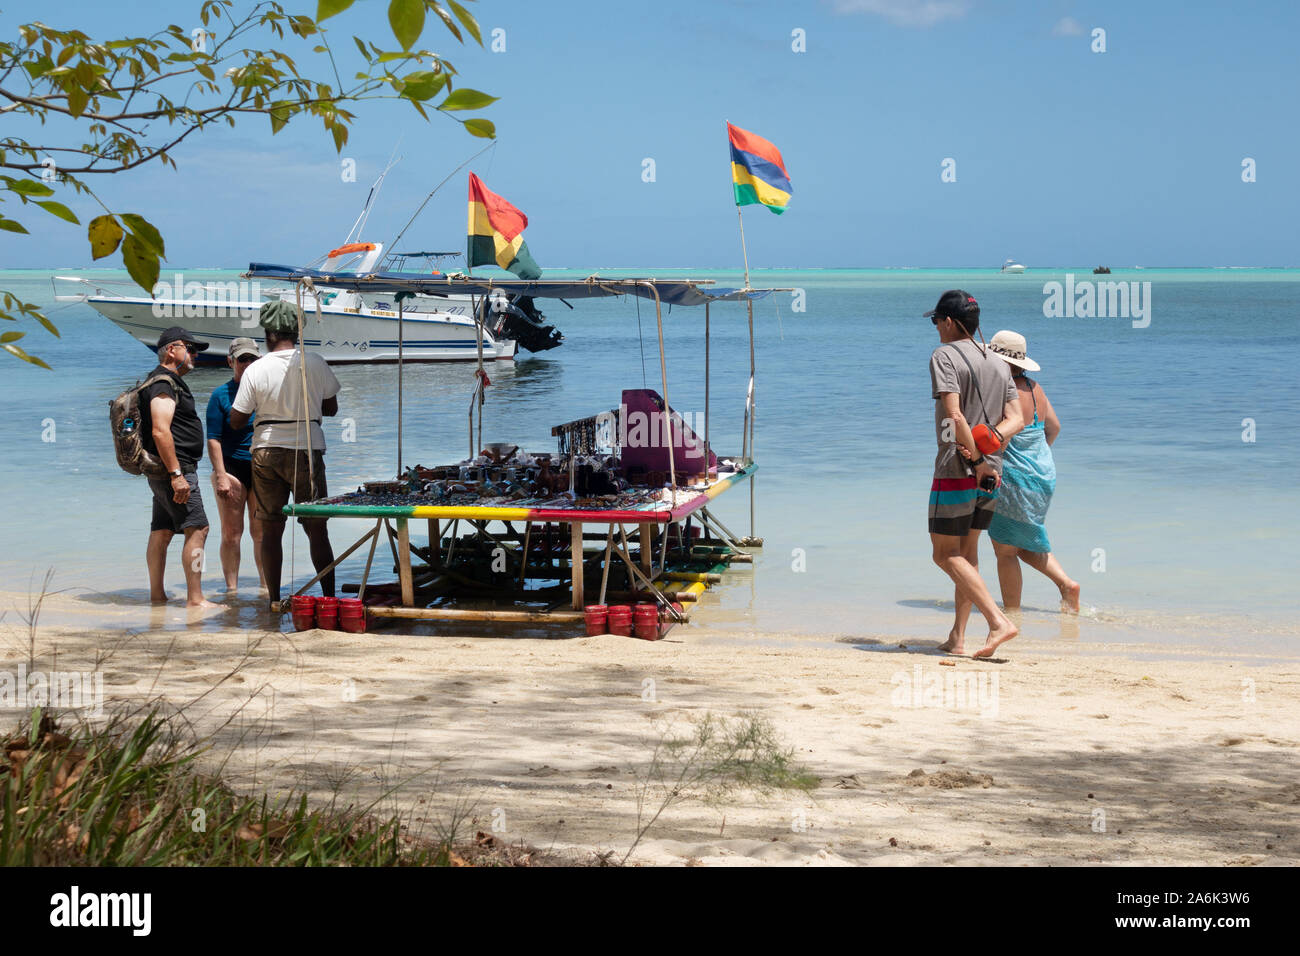 Mauritius tourists; tourists on the beach shopping from a boat stall selling gifts and souvenirs, Ile aux Benitiers, Maurtius Stock Photo